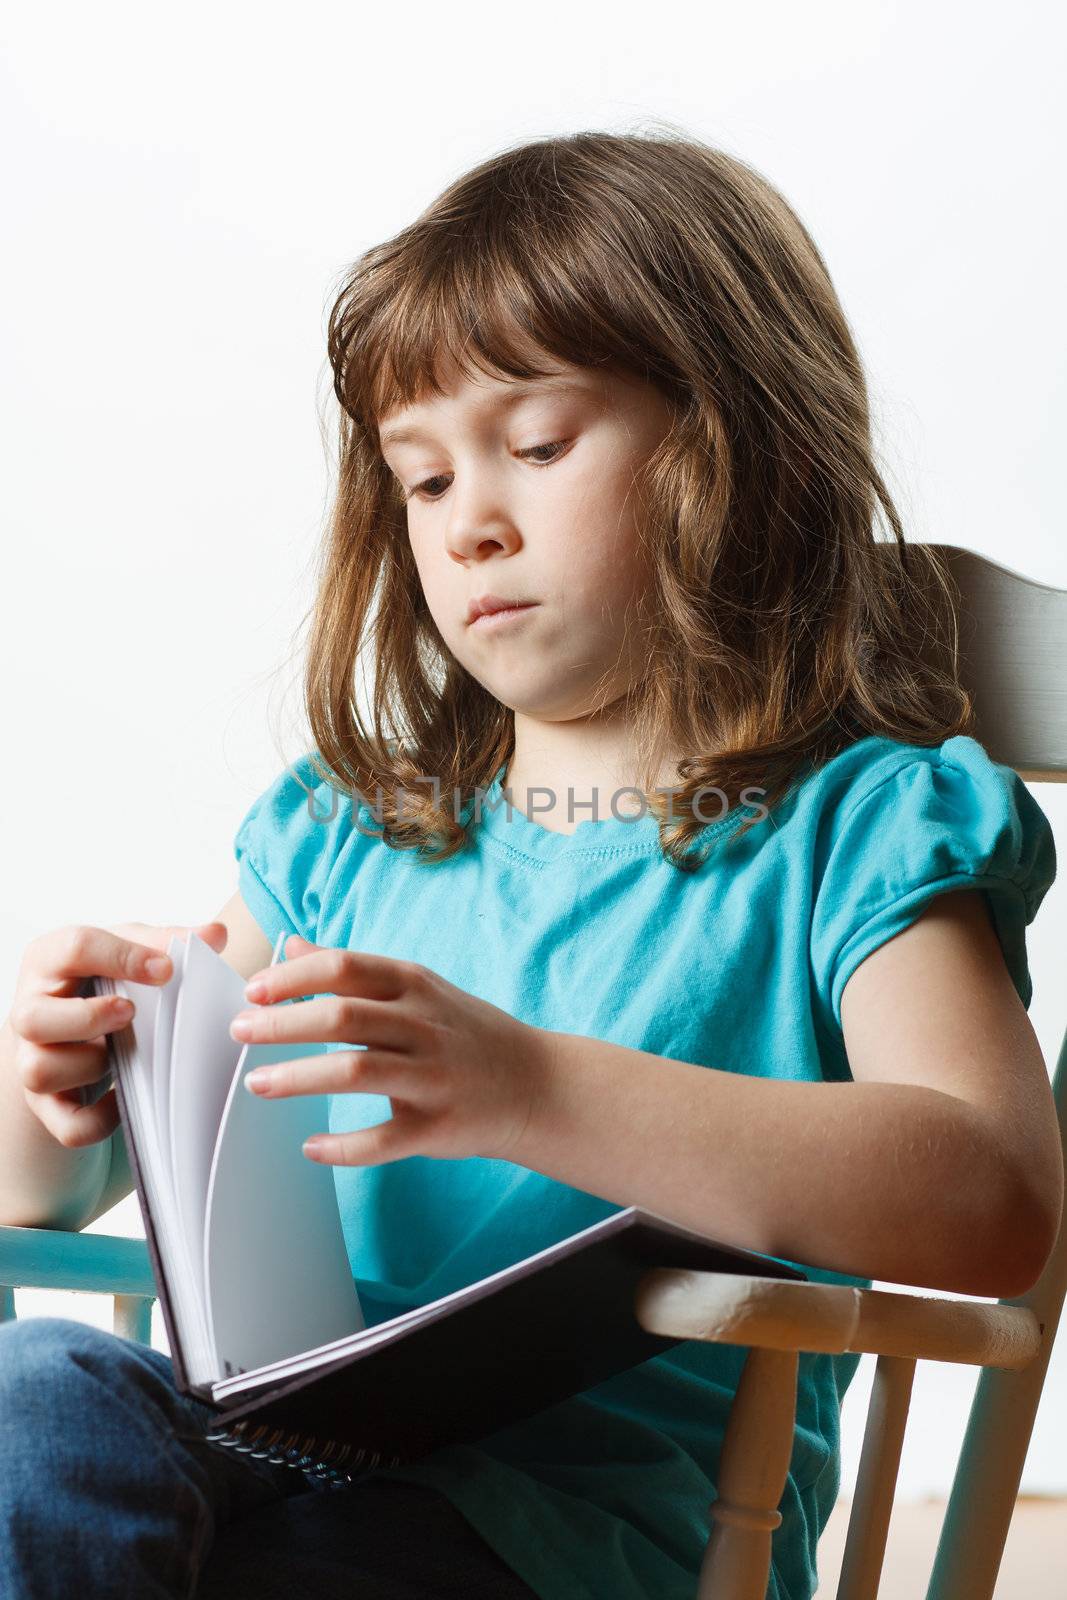 Cute little girl sitting and reading